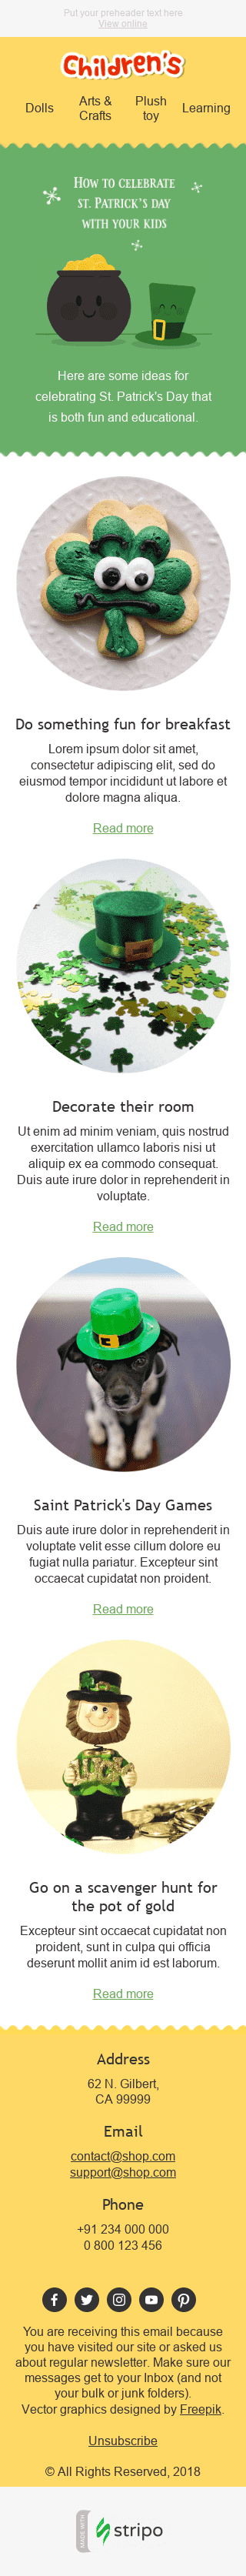 St. Patrick’s Day Email Template "Fun Ideas" for Kids Goods industry mobile view